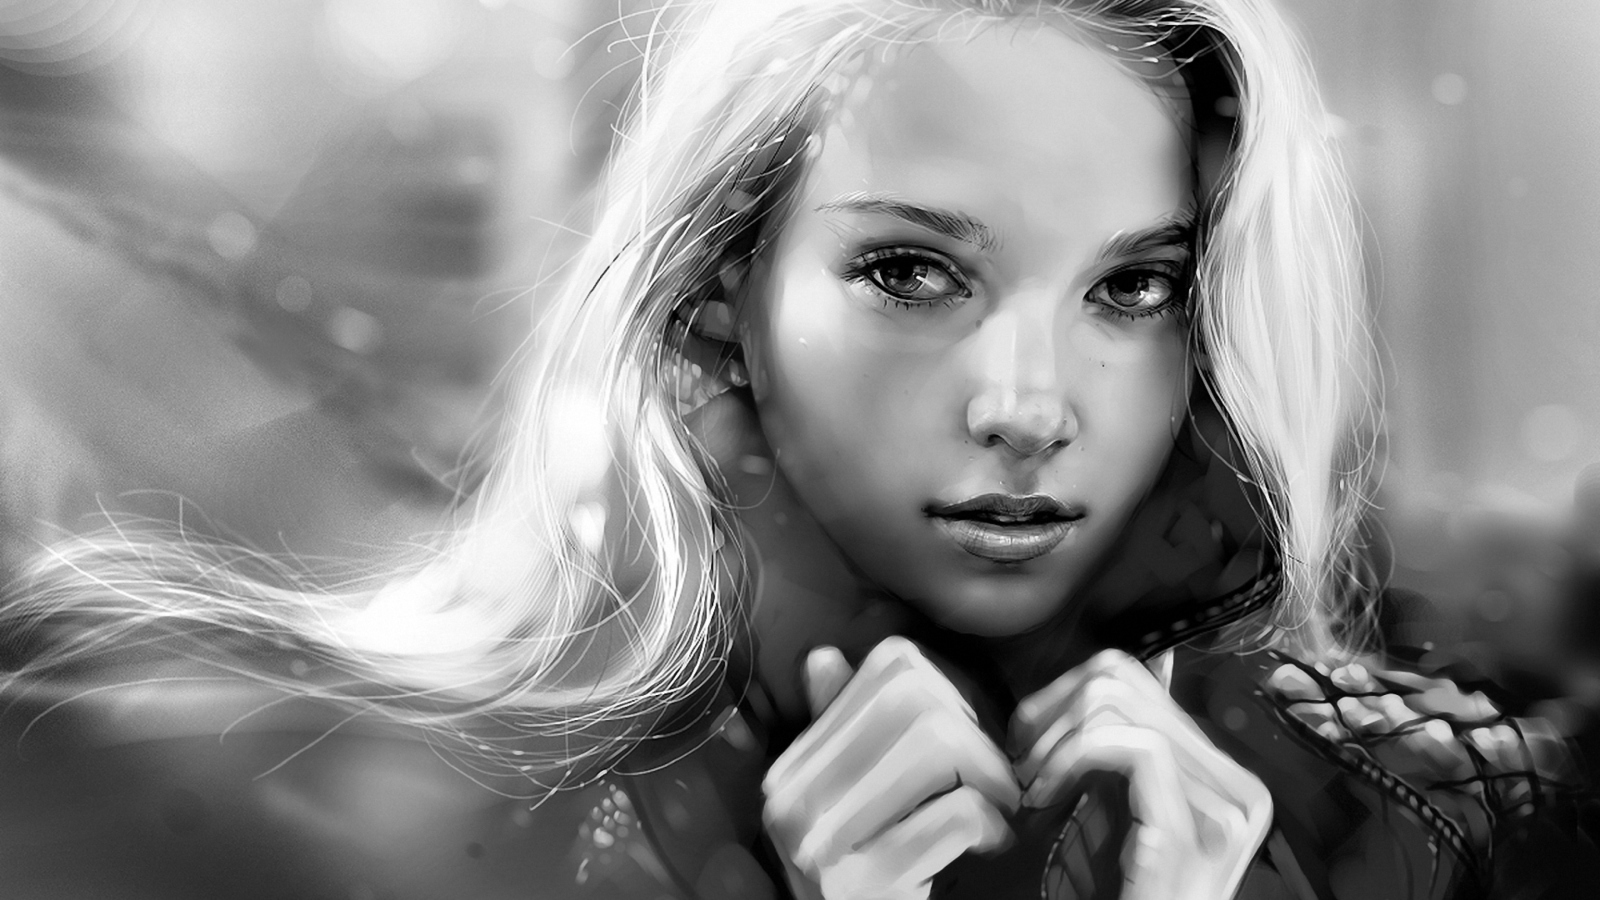 Black And White Blonde Painting wallpaper 1600x900